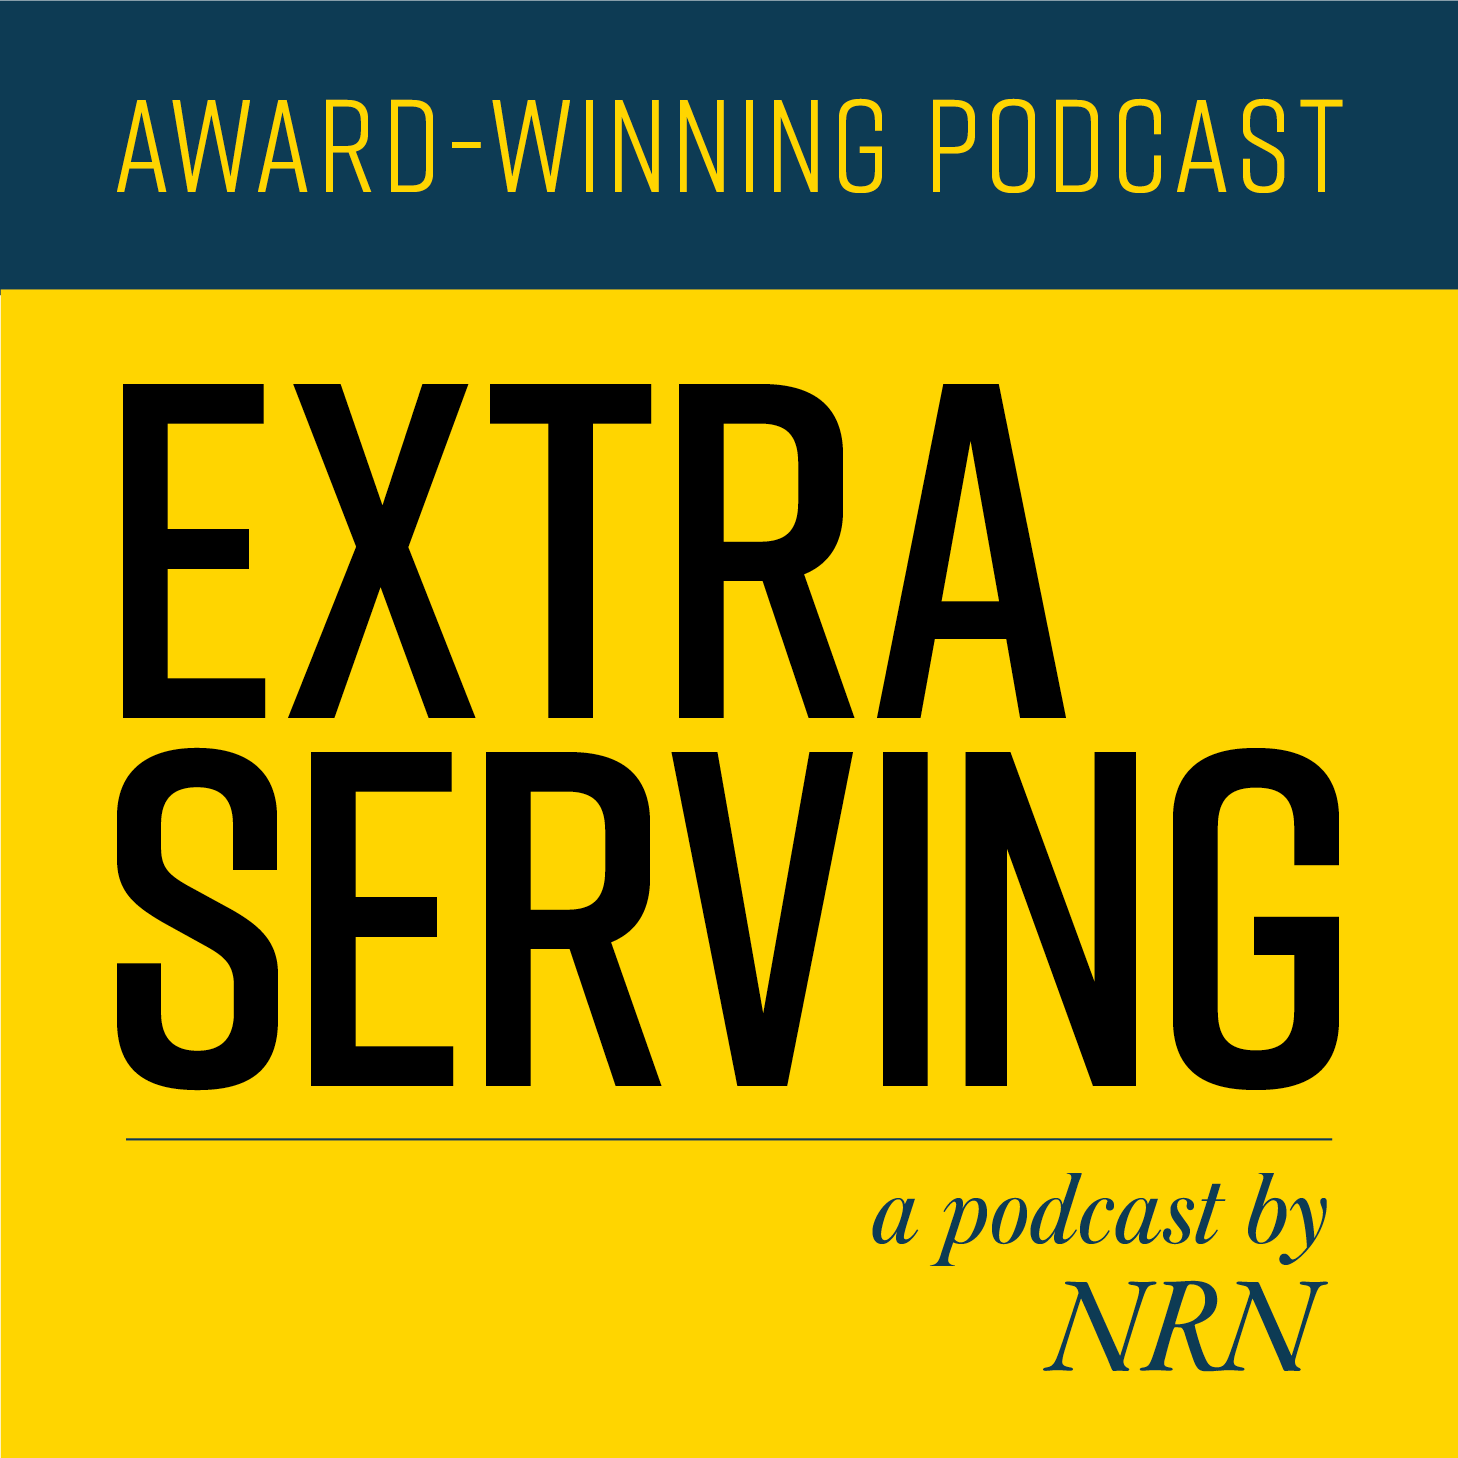 NRN editors discuss restaurant loyalty, prototypes and White Castle